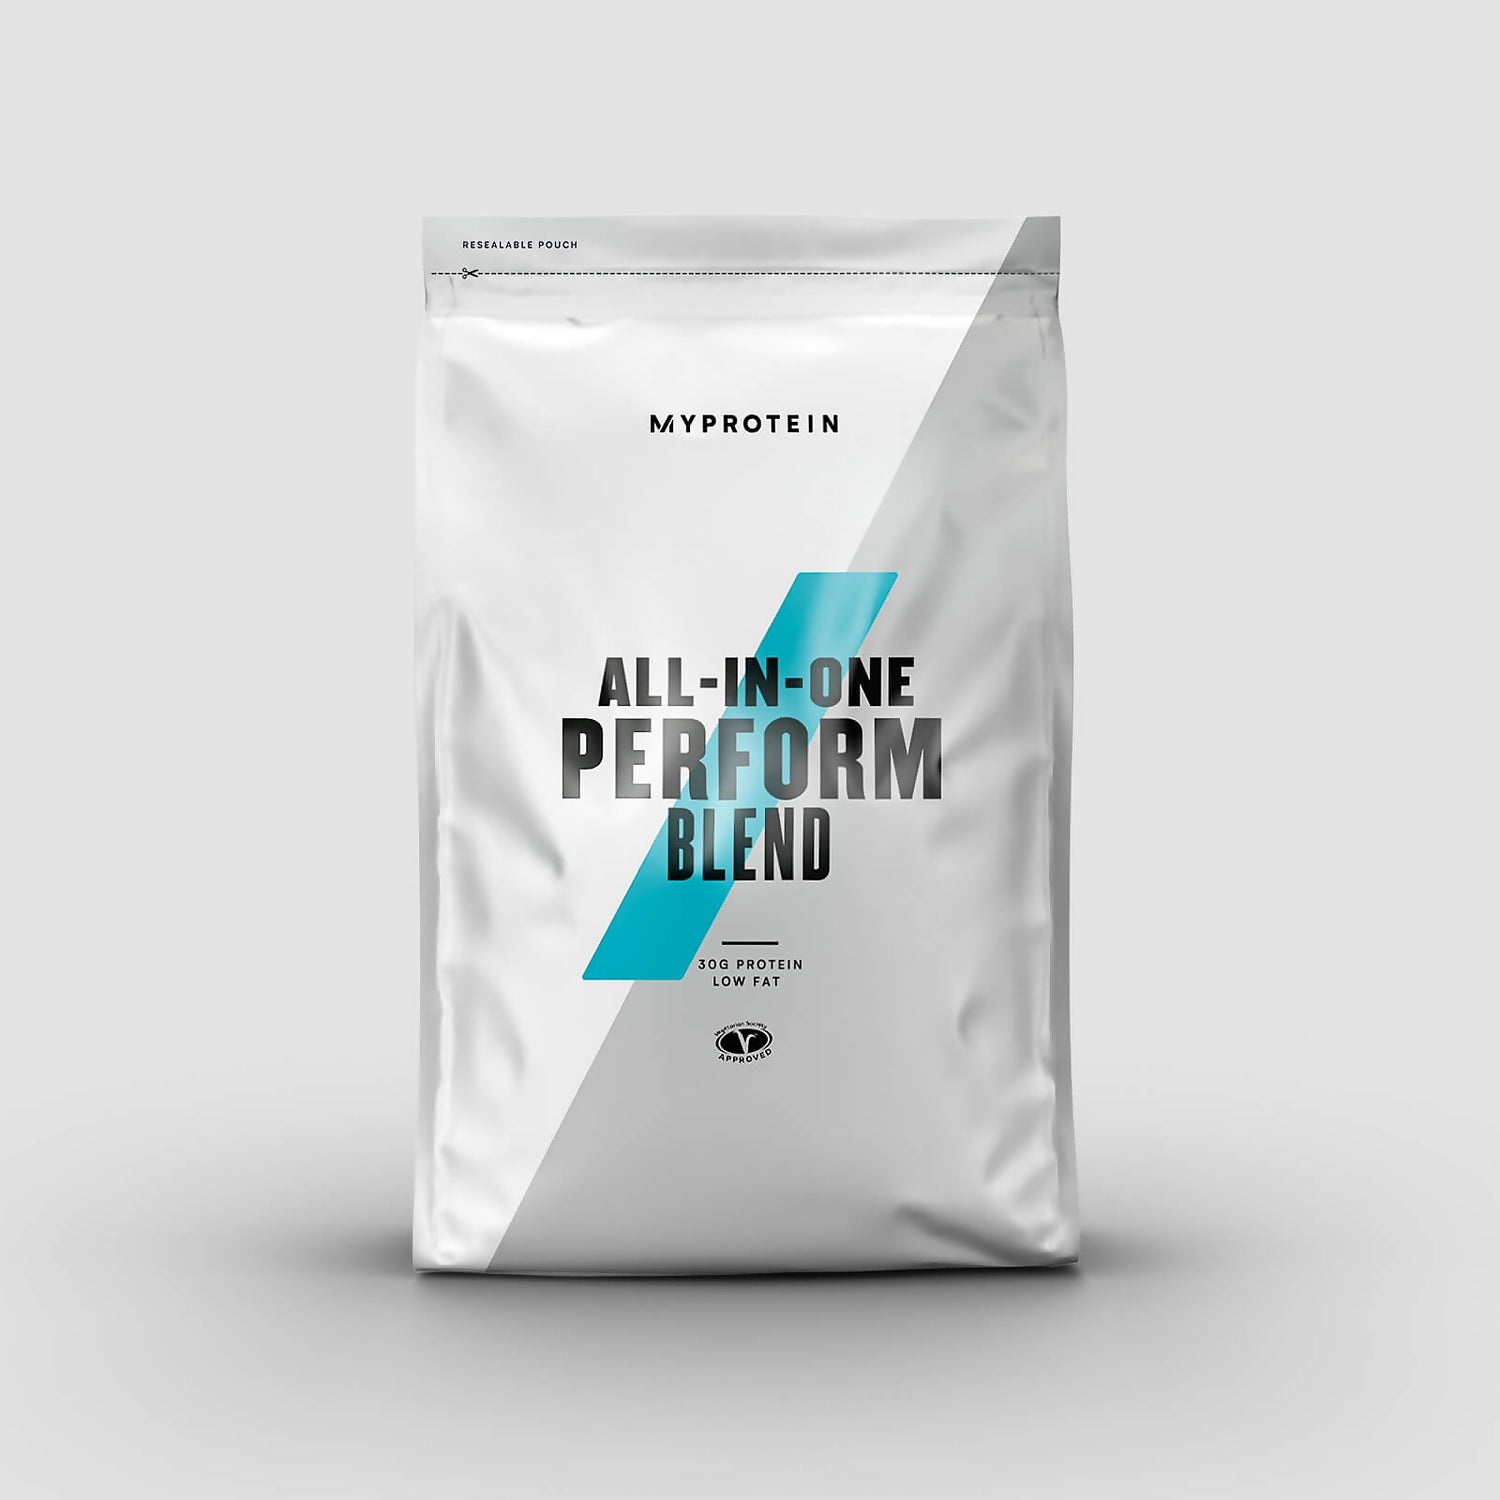 All-In-One Perform Blend - 2.5kg - Unflavoured